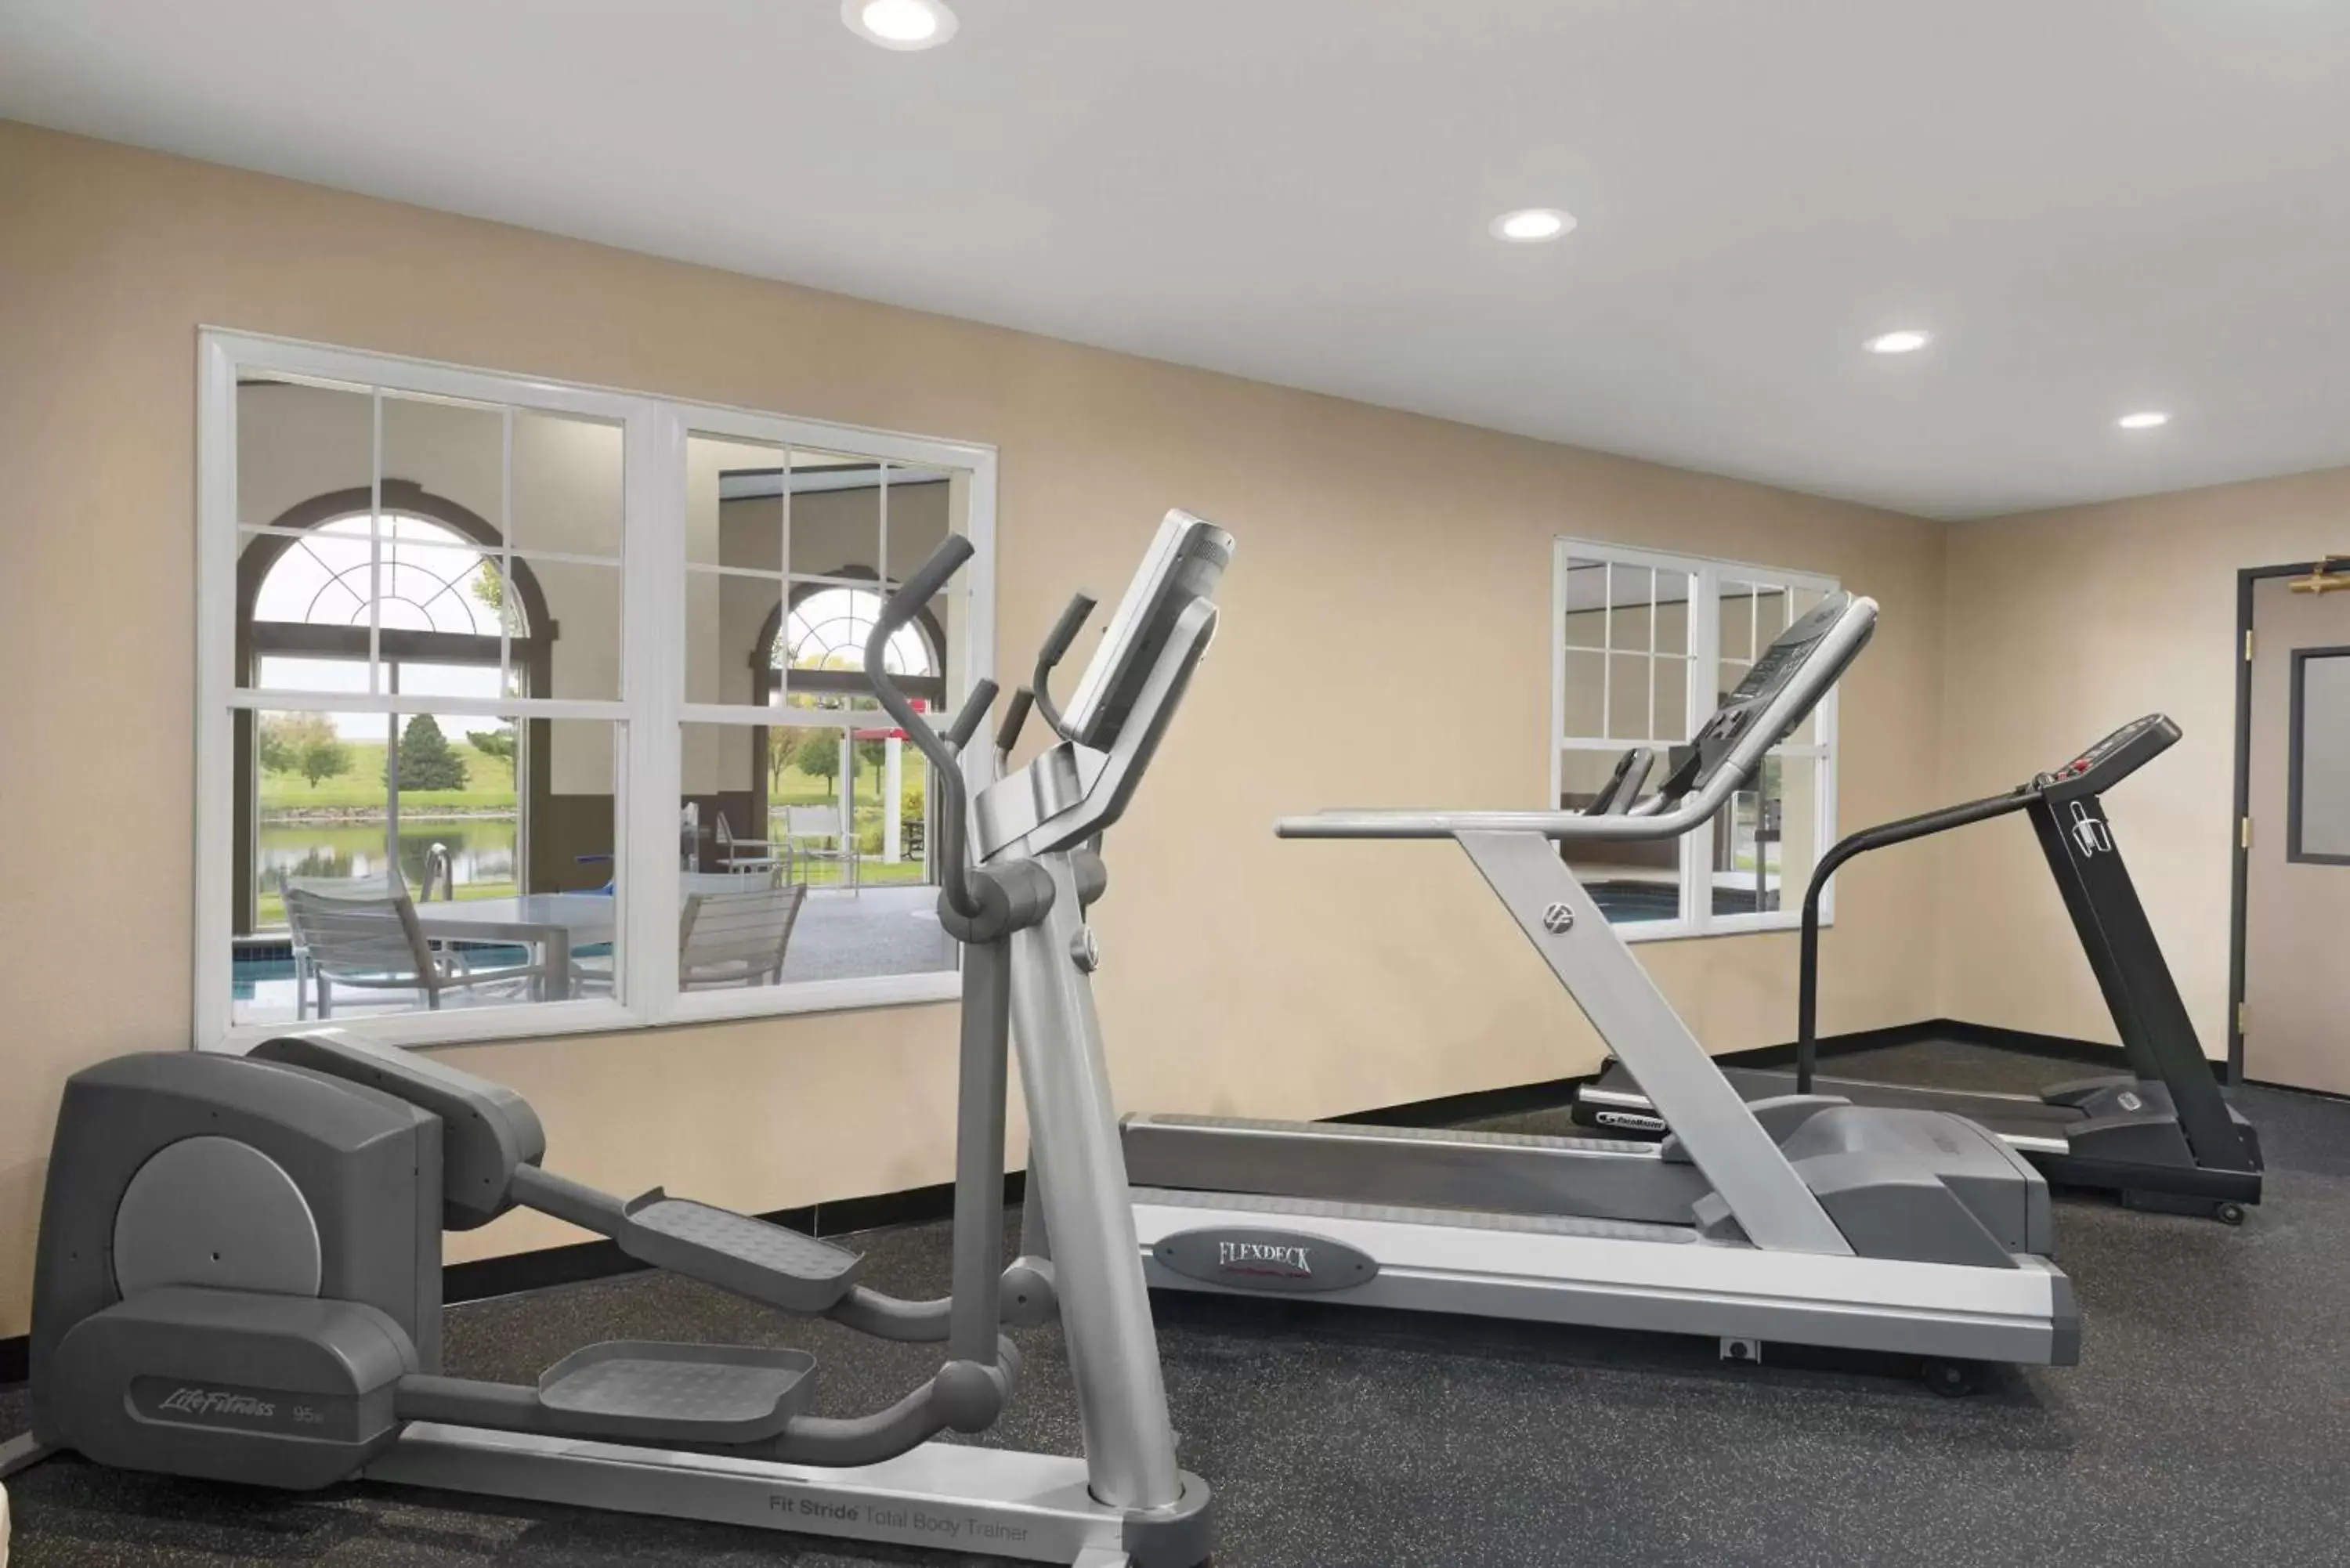 Activities, Fitness Center/Facilities in Country Inn & Suites by Radisson, Ankeny, IA